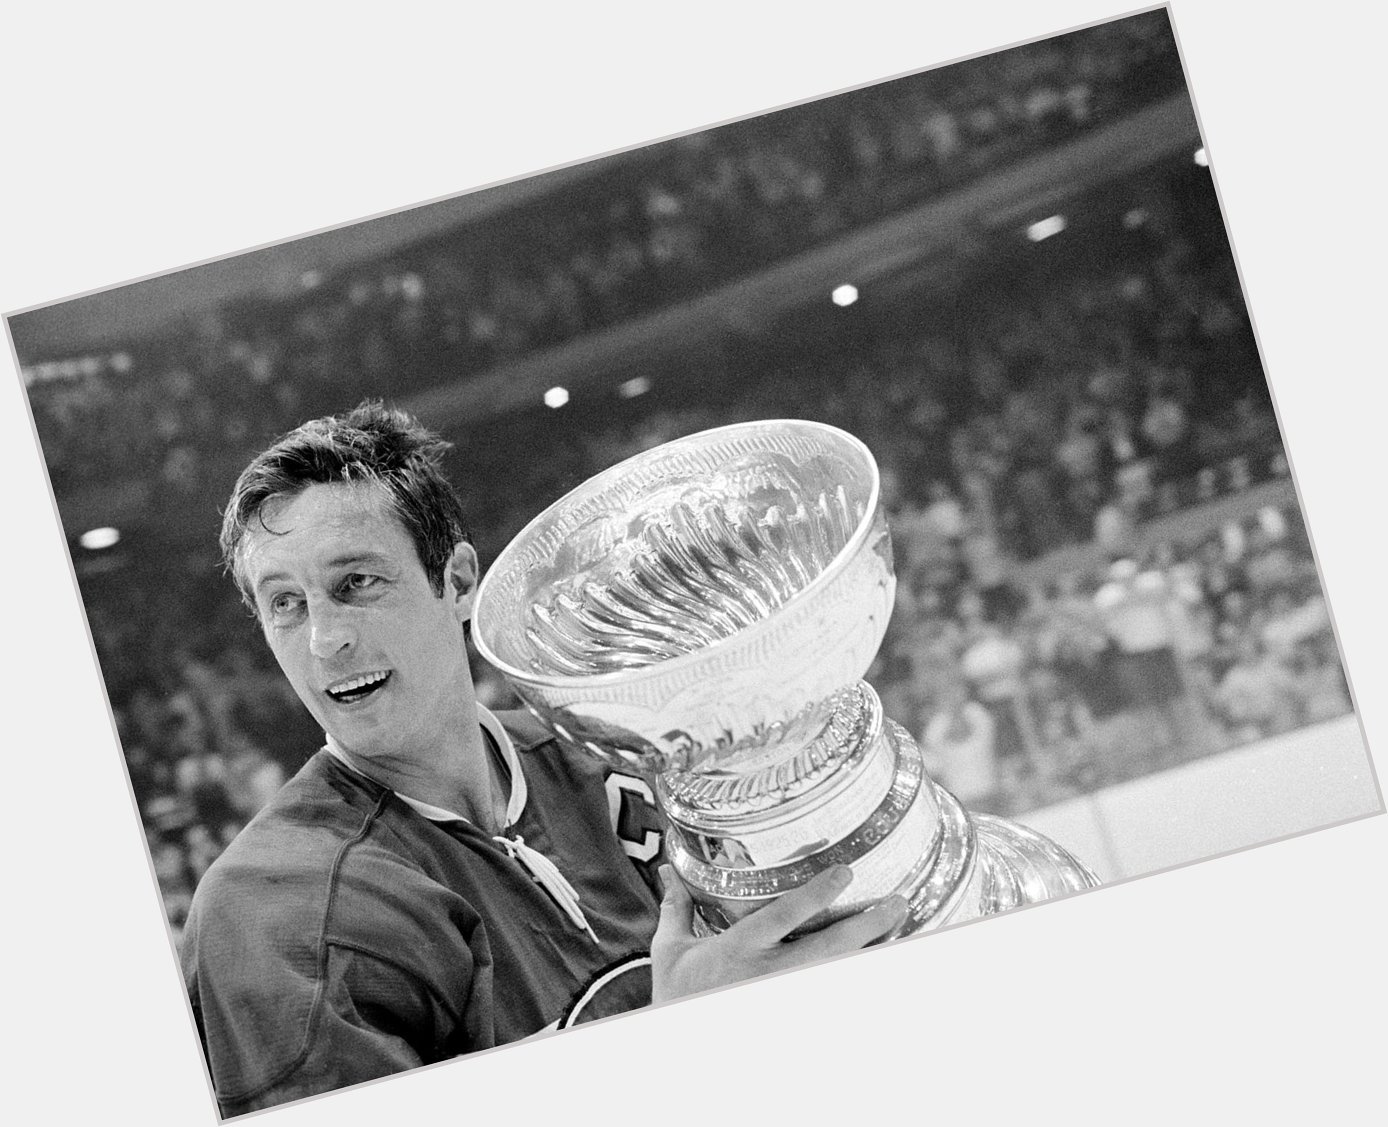 Happy angel birthday to Le Gros Bill Jean Beliveau. He would have been 88. 